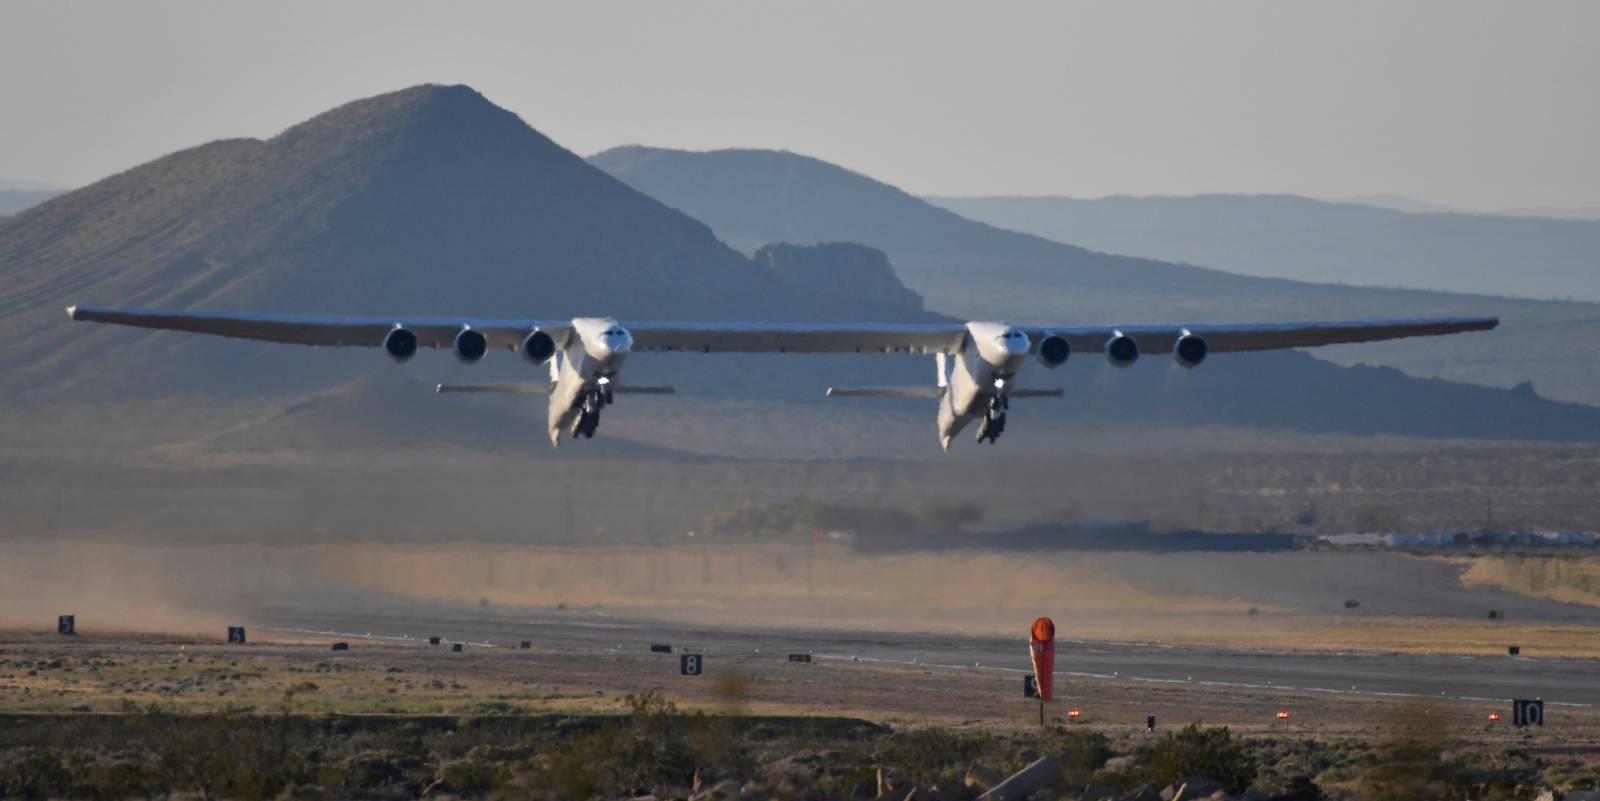 The world's largest airplane, built by the late Paul Allen's company Stratolaunch, makes its first test flight in Mojave